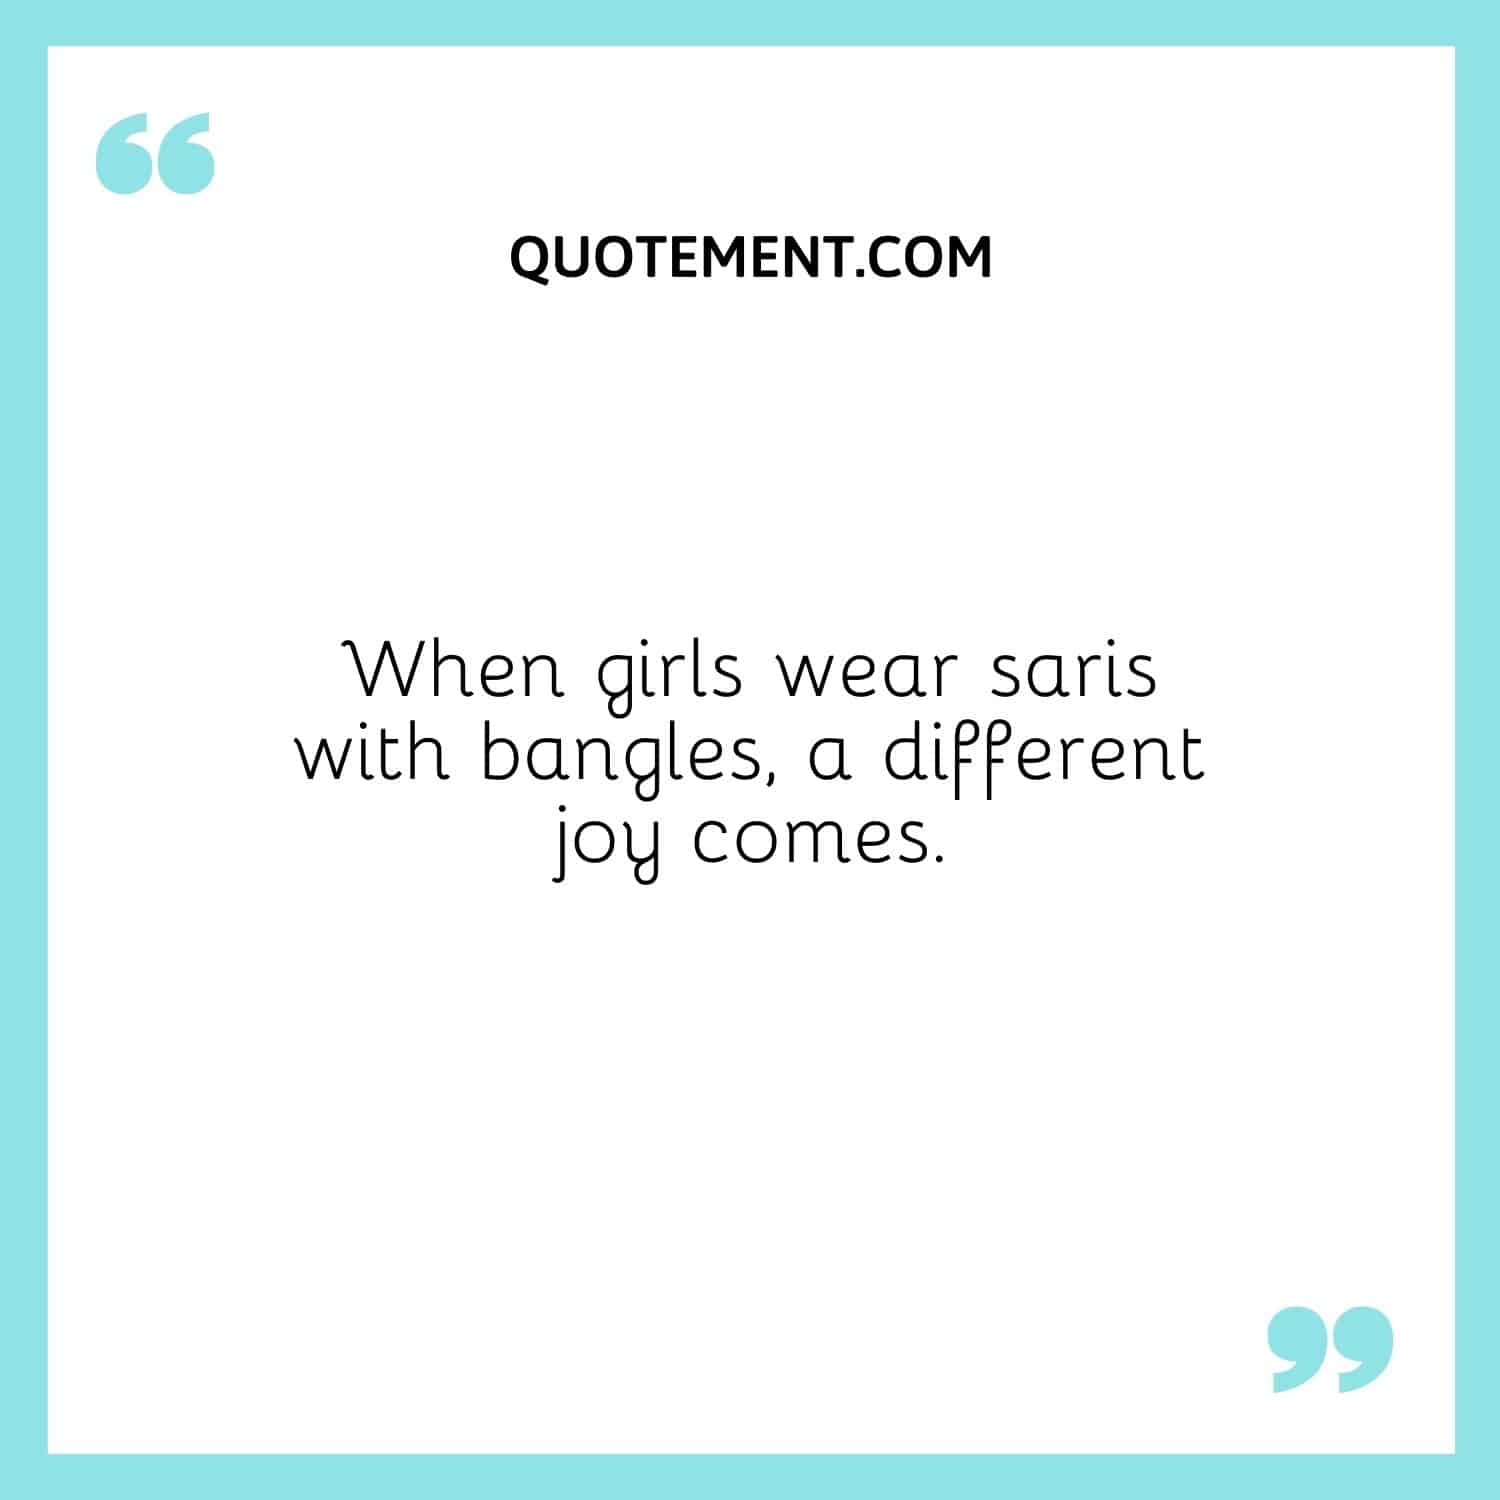 When girls wear saris with bangles, a different joy comes.